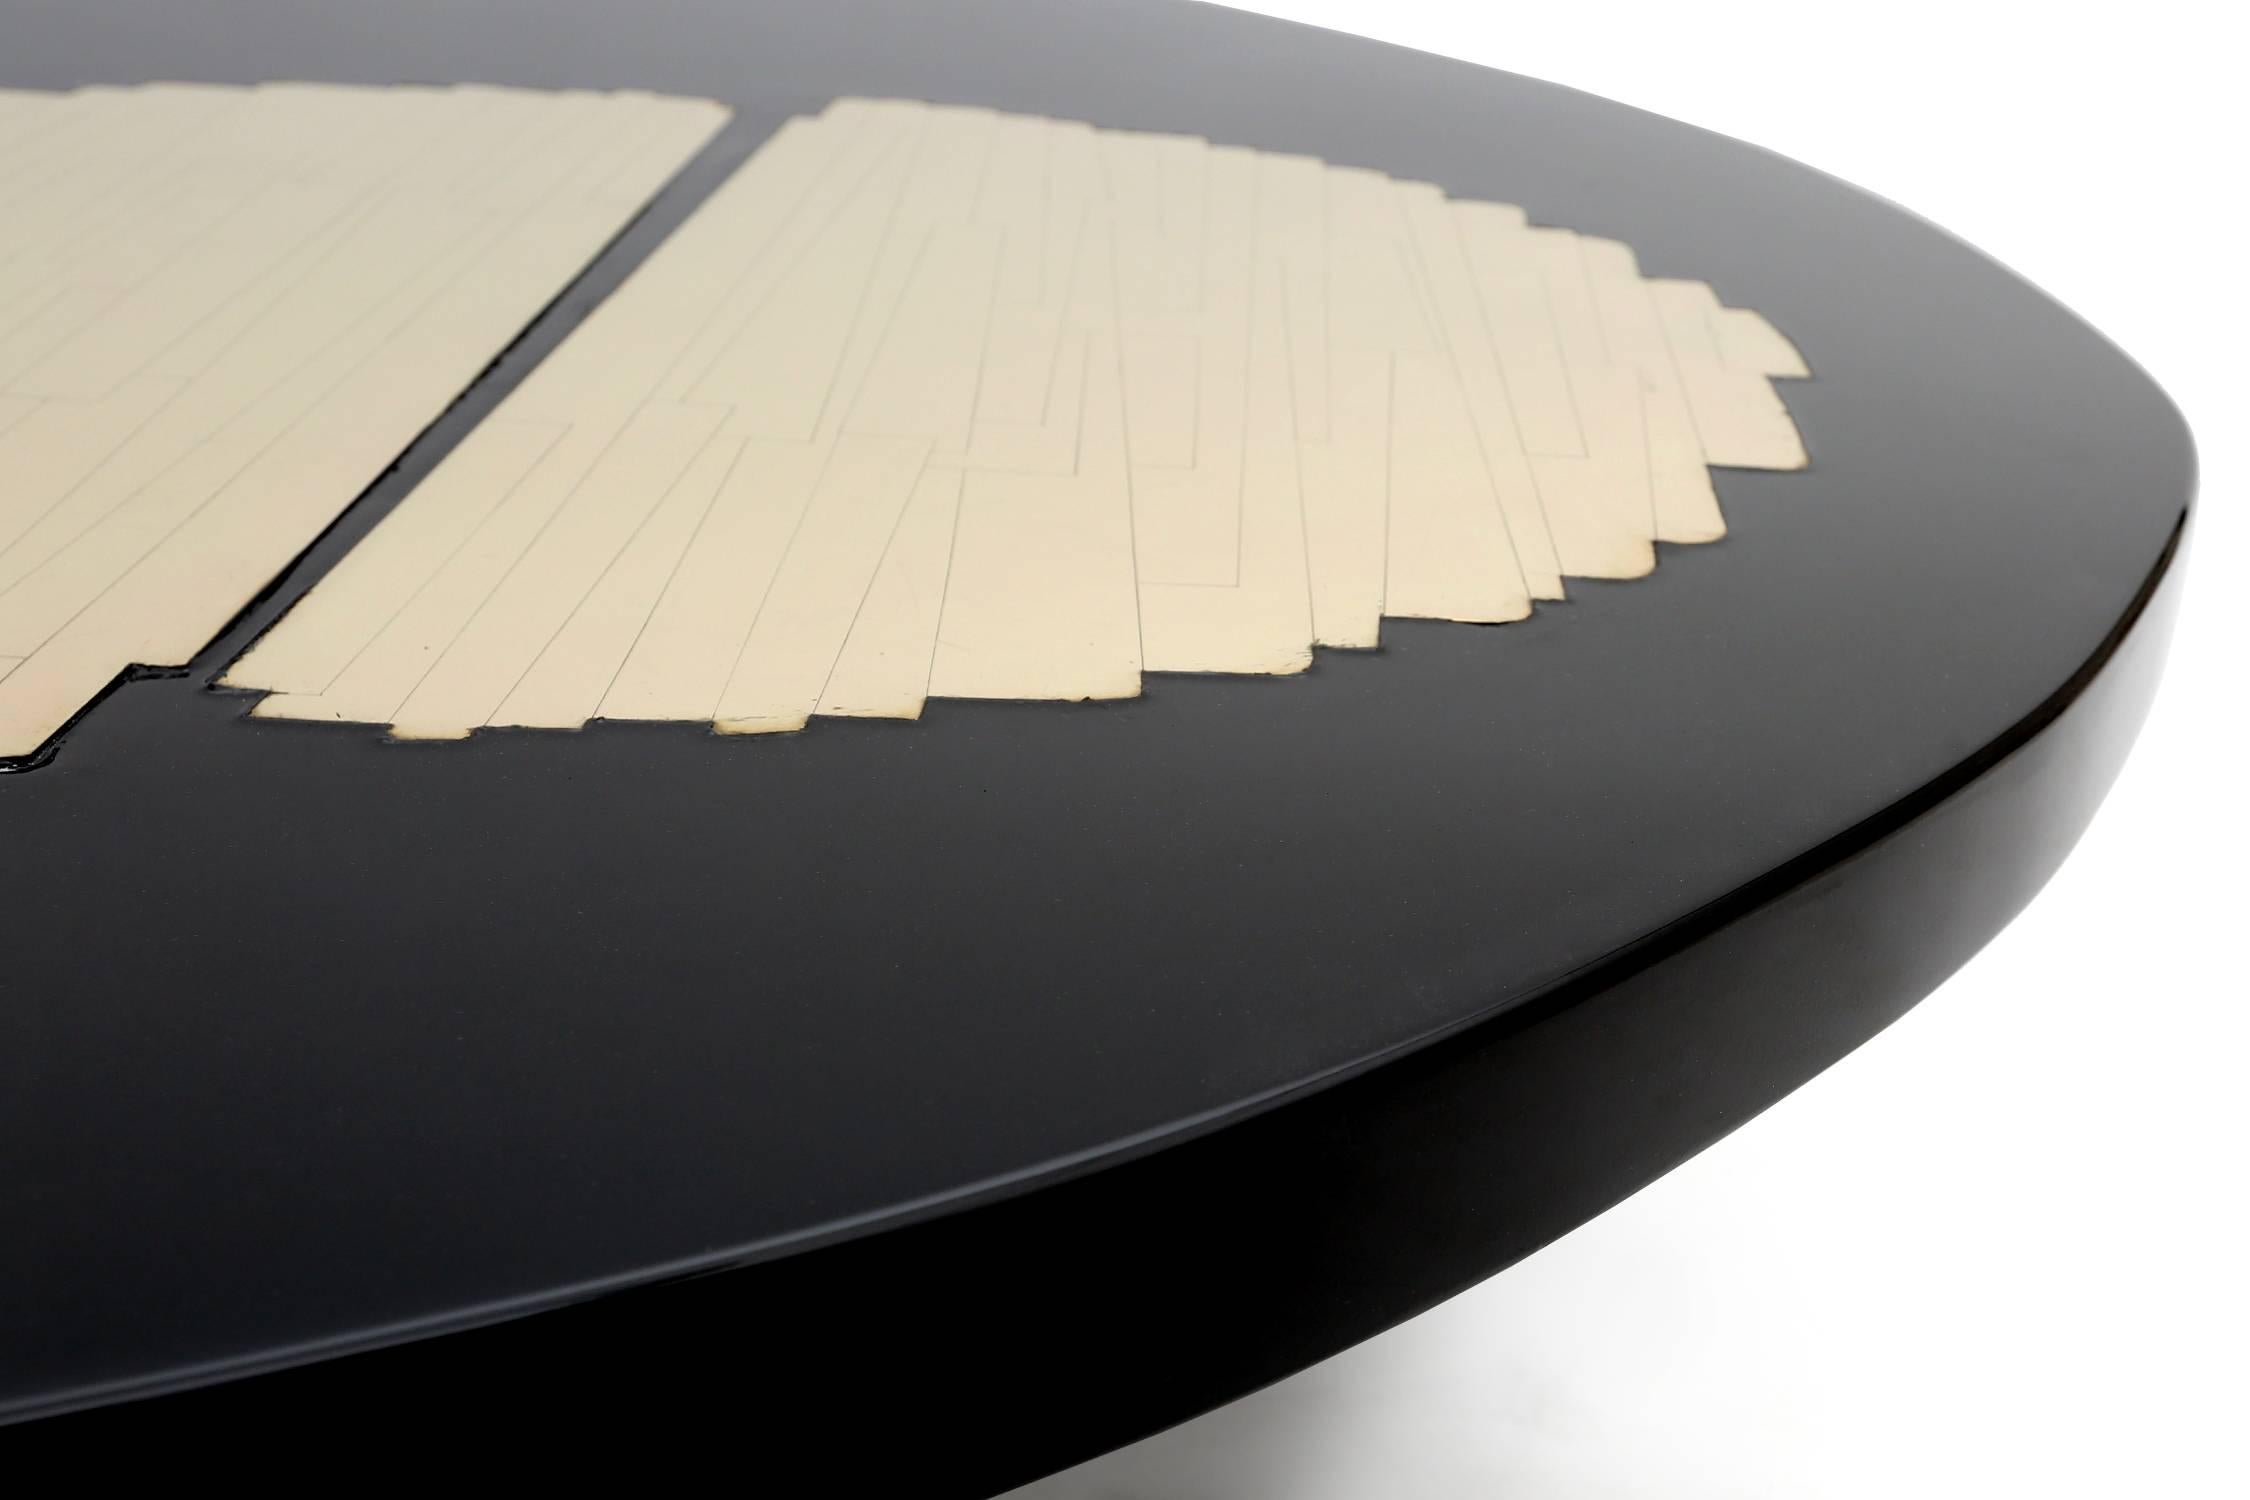 Black lacquered anamorphic round coffee table
Brass art inlay signed Group Z (co-op with Roger Vanhevel and artists like Matthias, Chale and Dresse)

Belgium, 1970s.

The lacquer is in stunning condition, a true high-end piece.

Measures: L